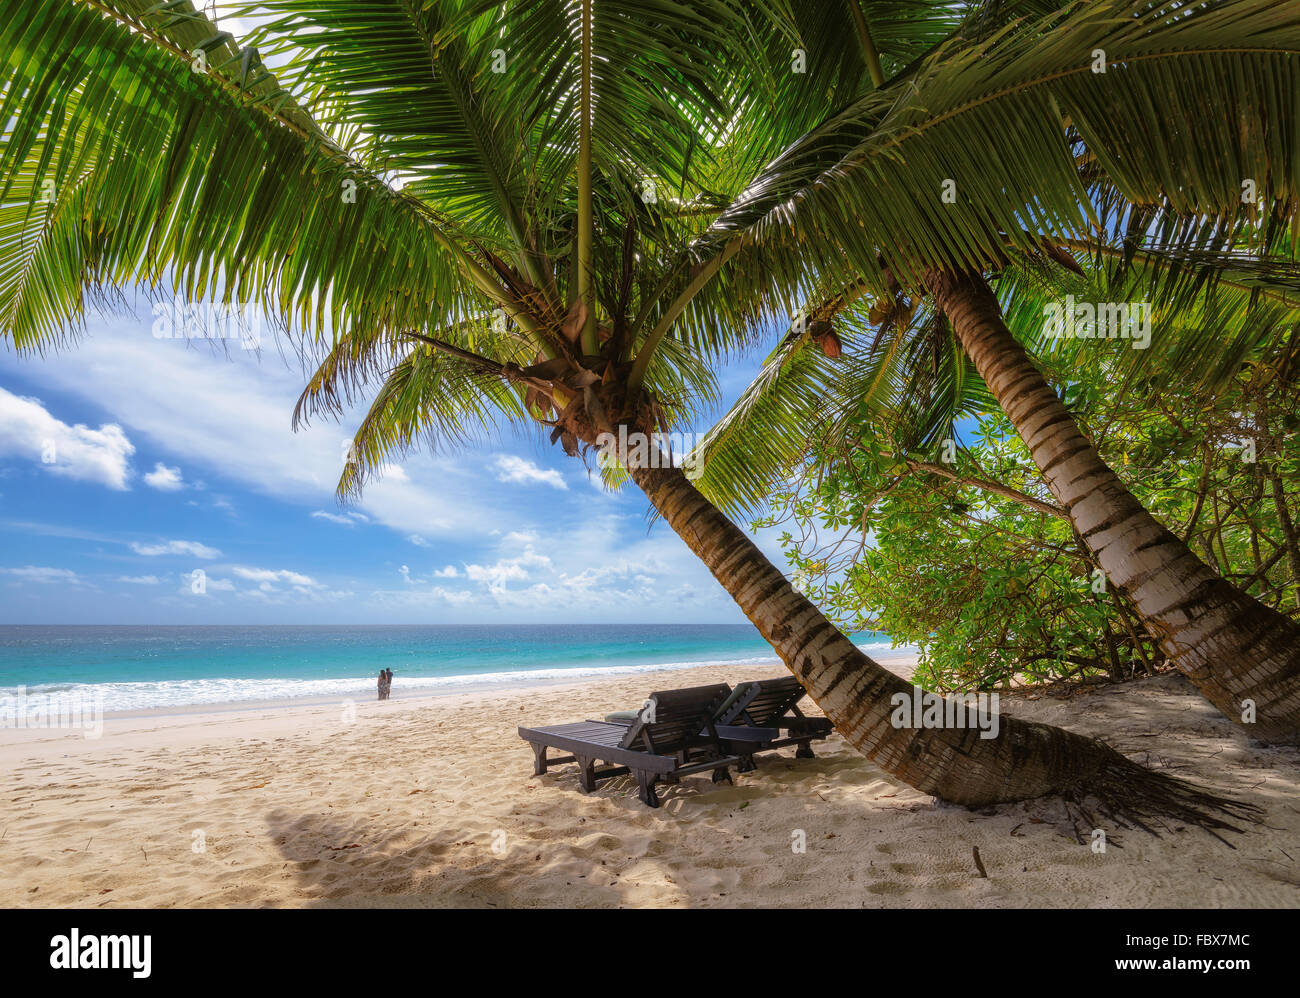 Palms and tropical beach Stock Photo